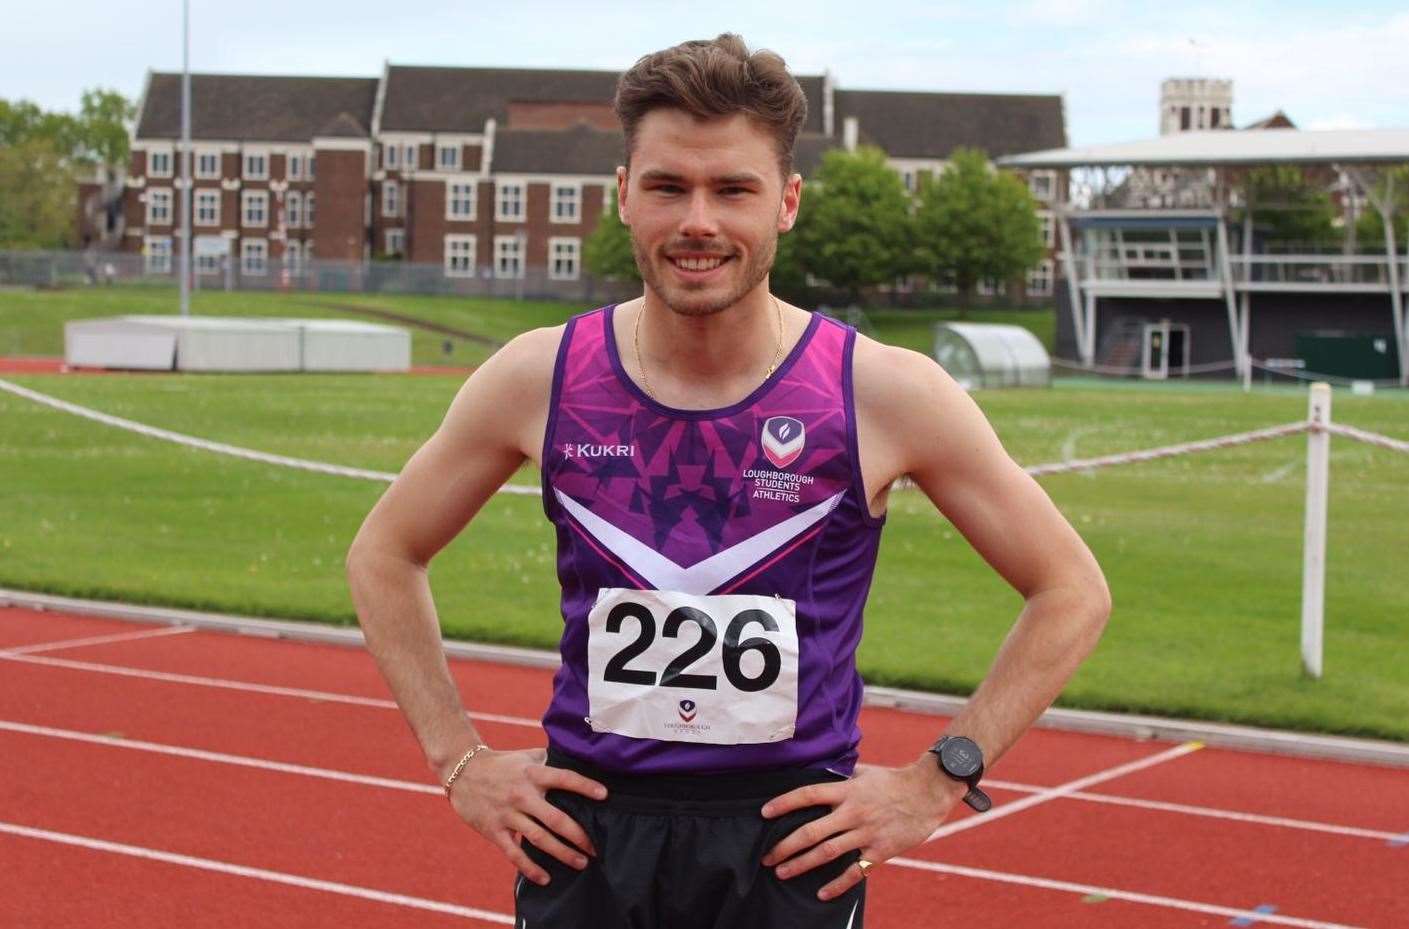 Simon Coppard takes part in the 1,500m in Manchester this weekend. (48548577)